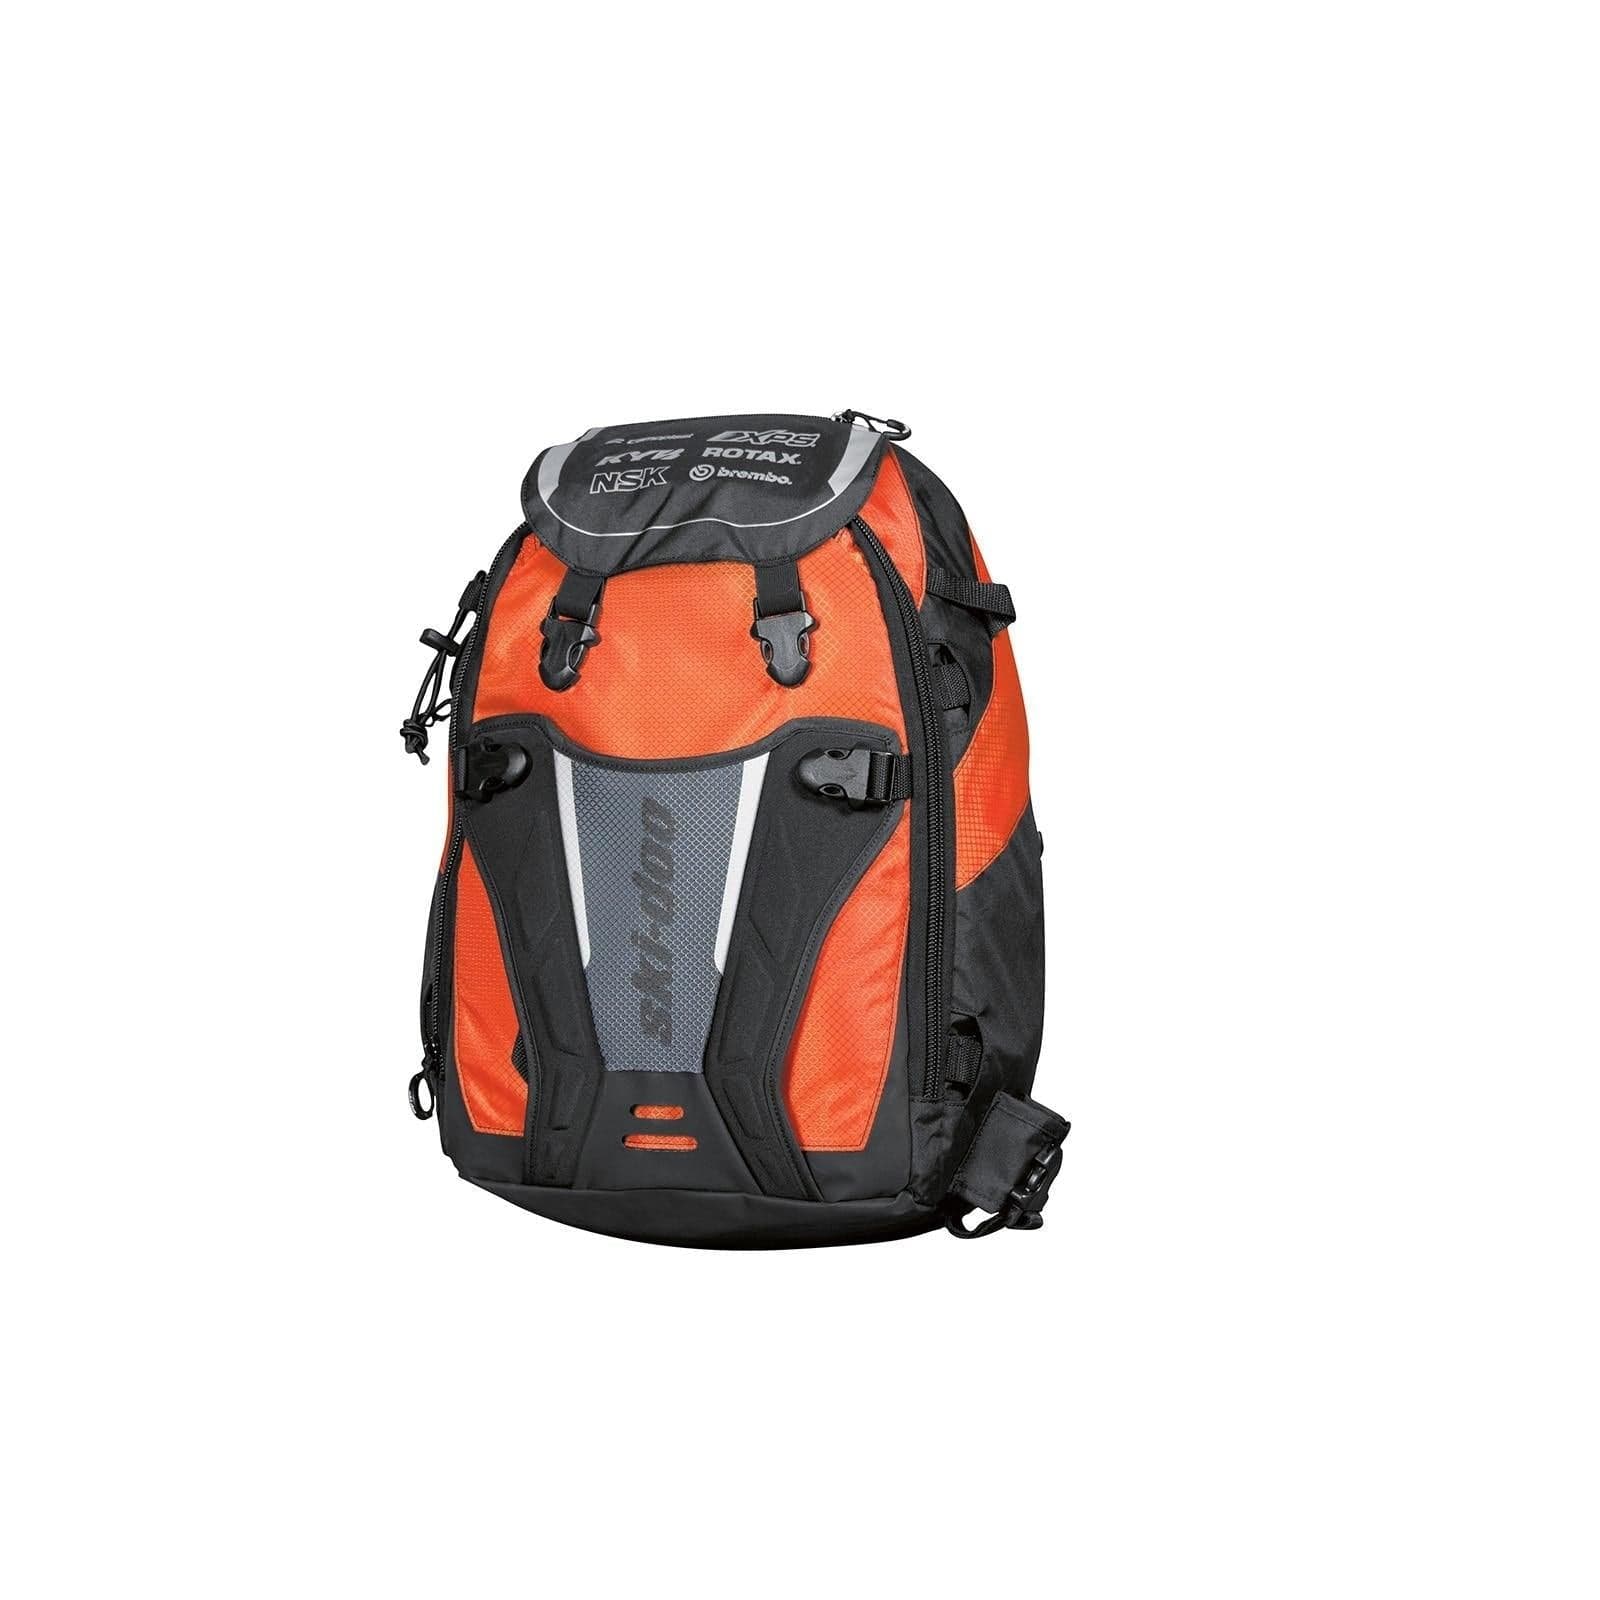 Tunnel Backpack with LinQ Soft Strap - 28 L / Orange